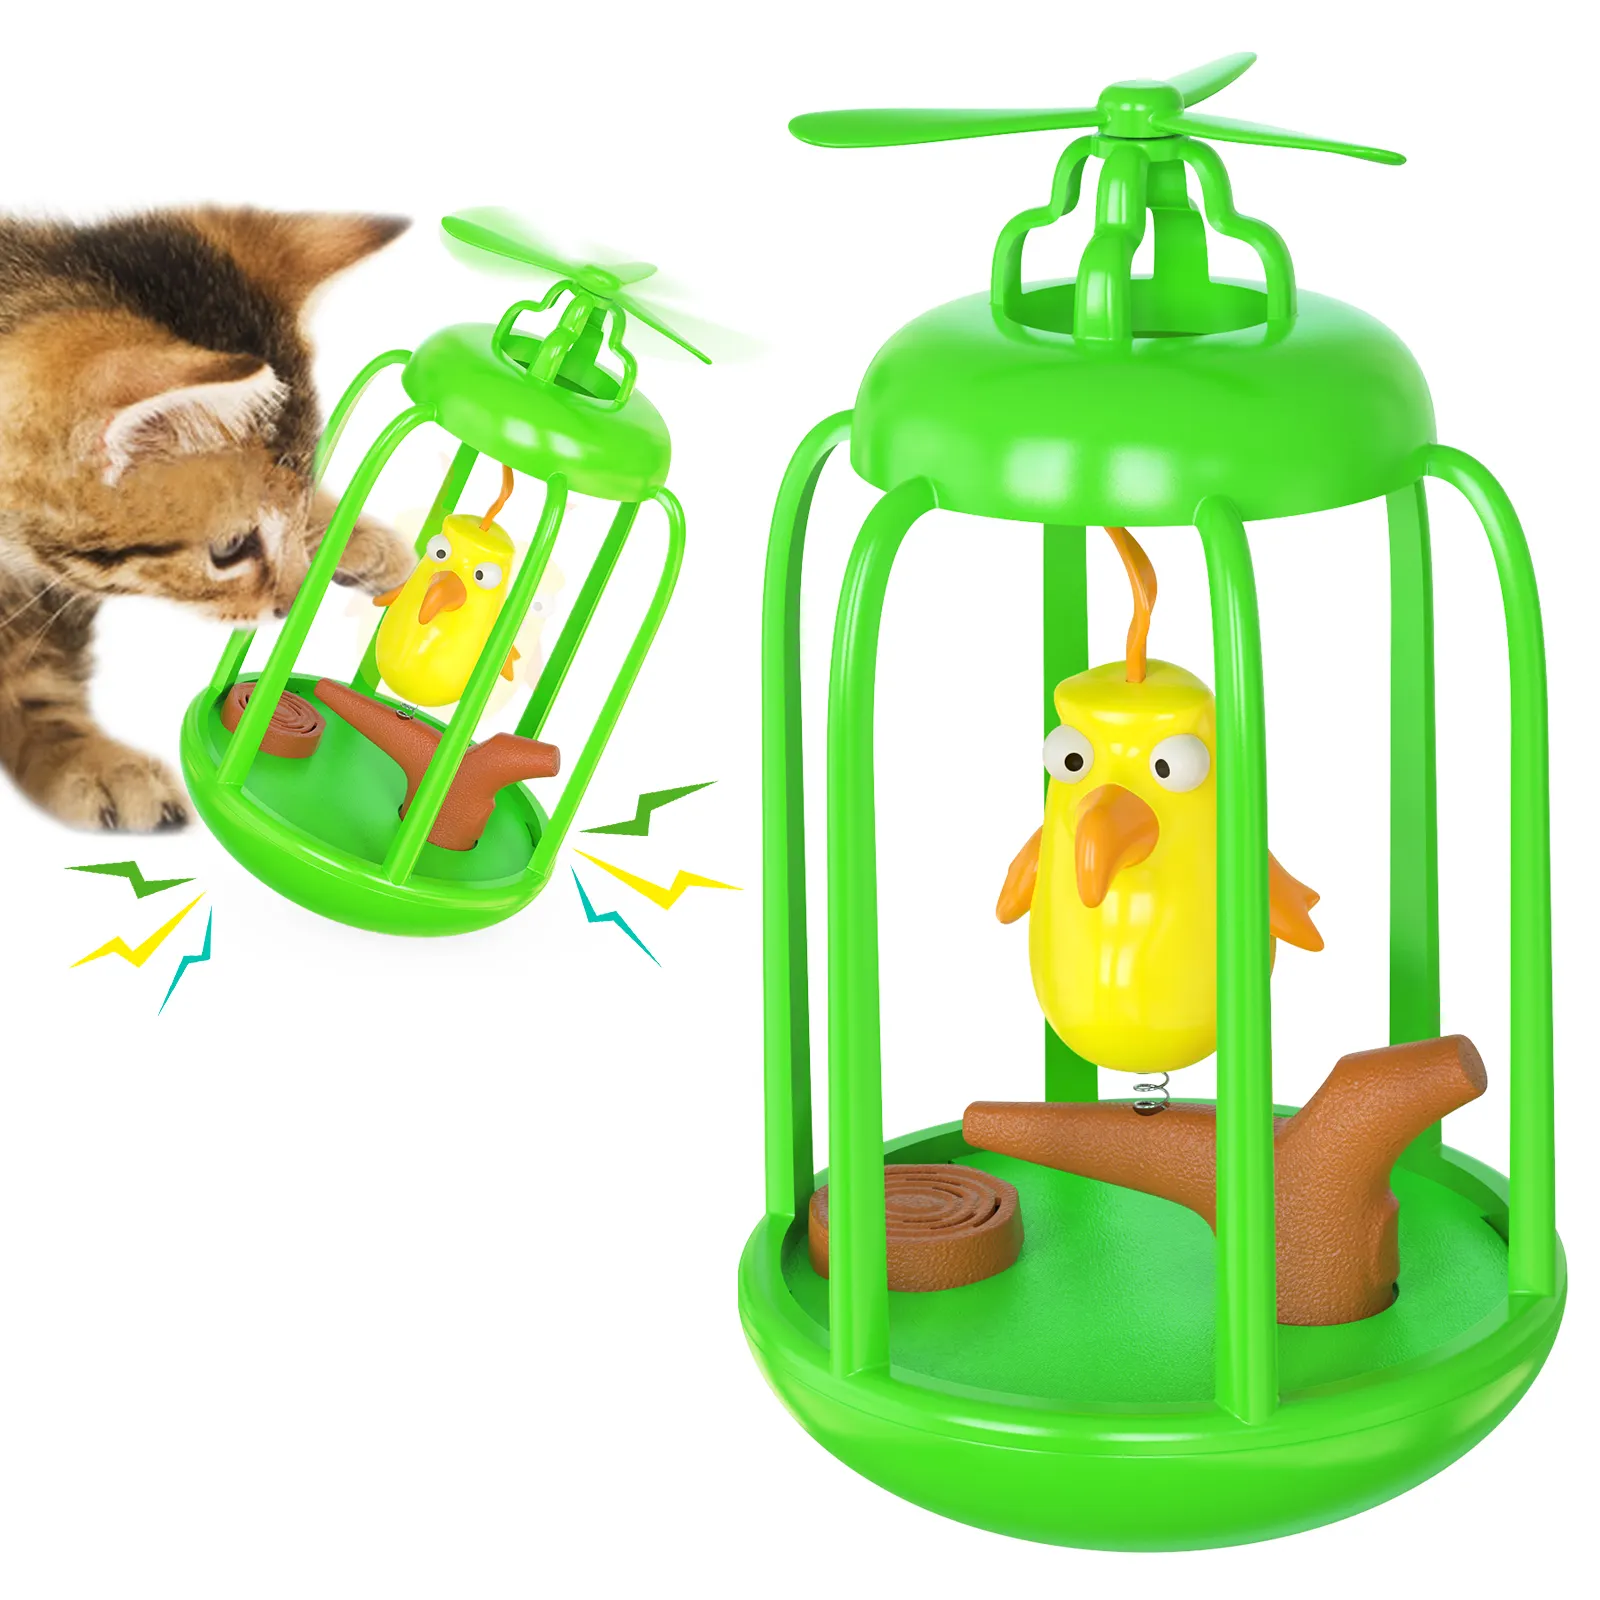 Pet Cat Interactive Sounding Playing Toy Bird House Cage Tumbler Kitten Cat Toy